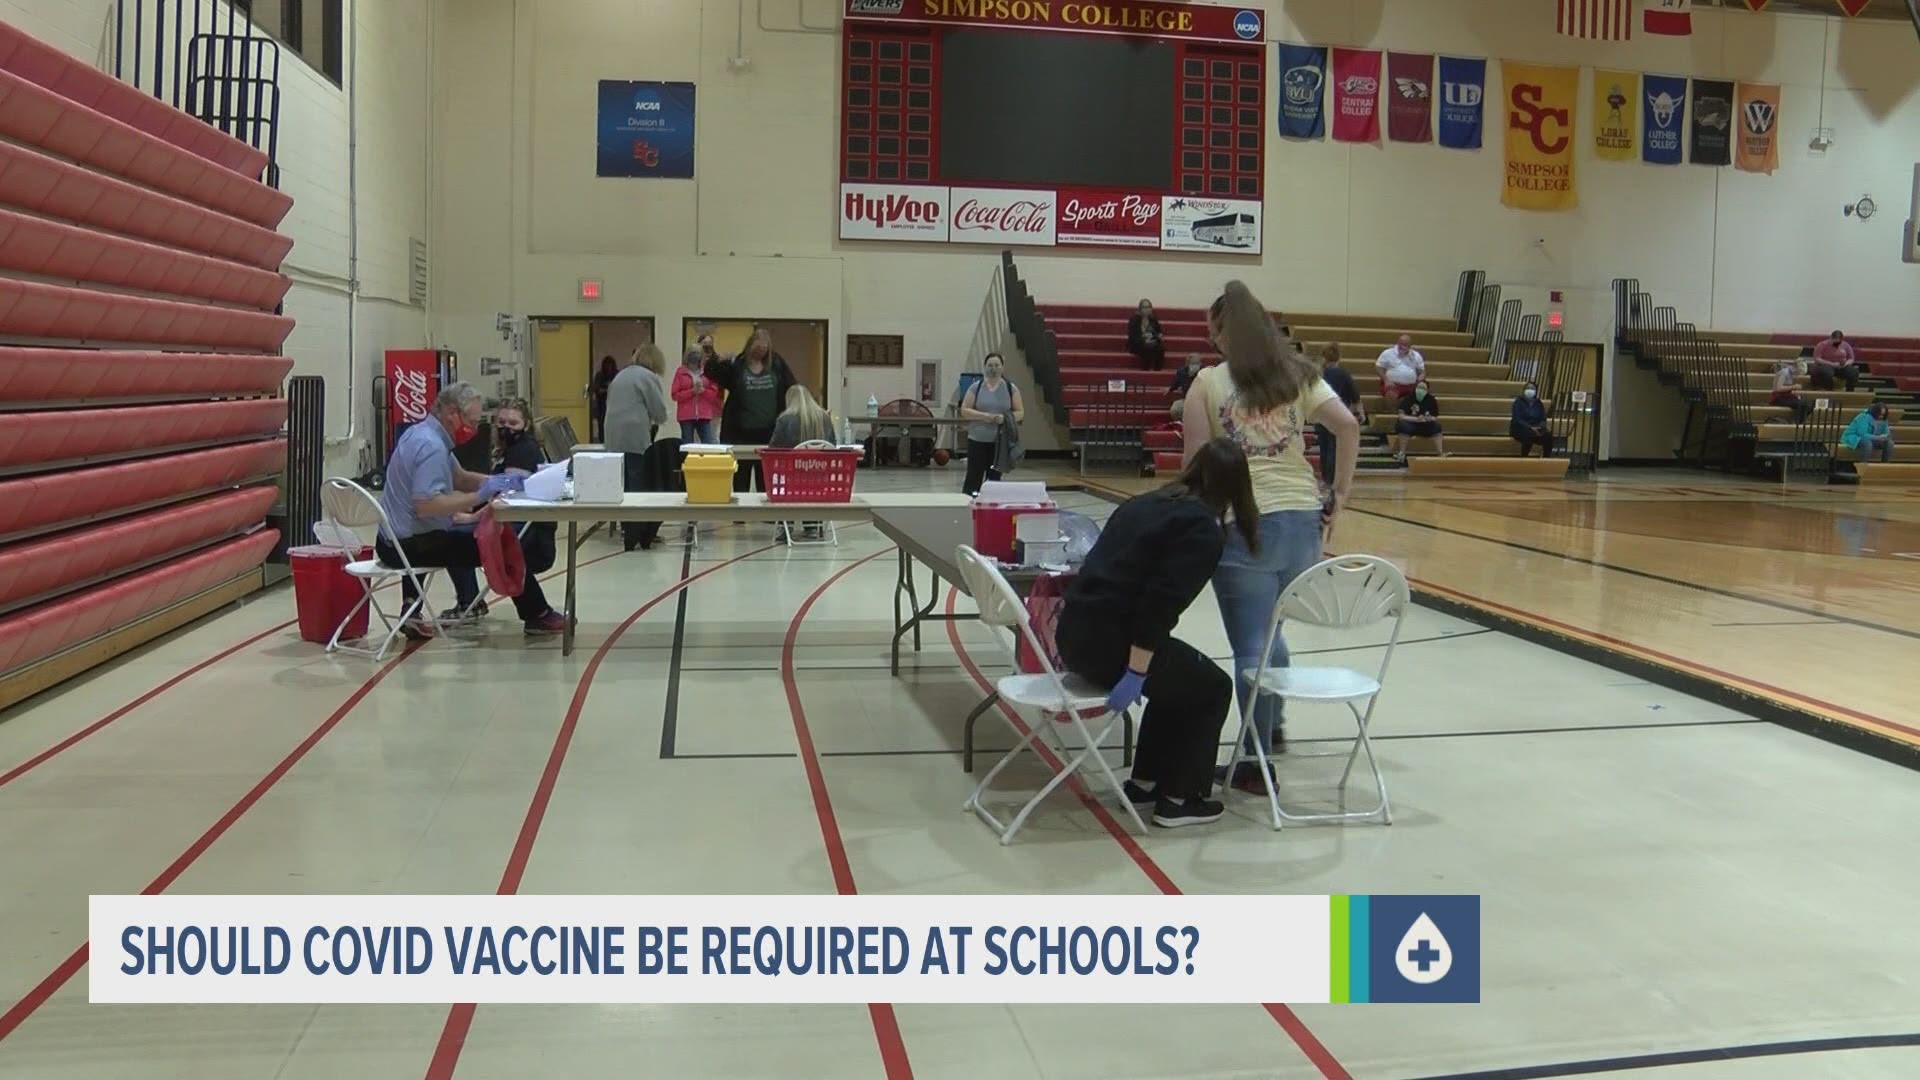 Luke Behaunek, the school's Dean of Students, said they do require other types of vaccines already.